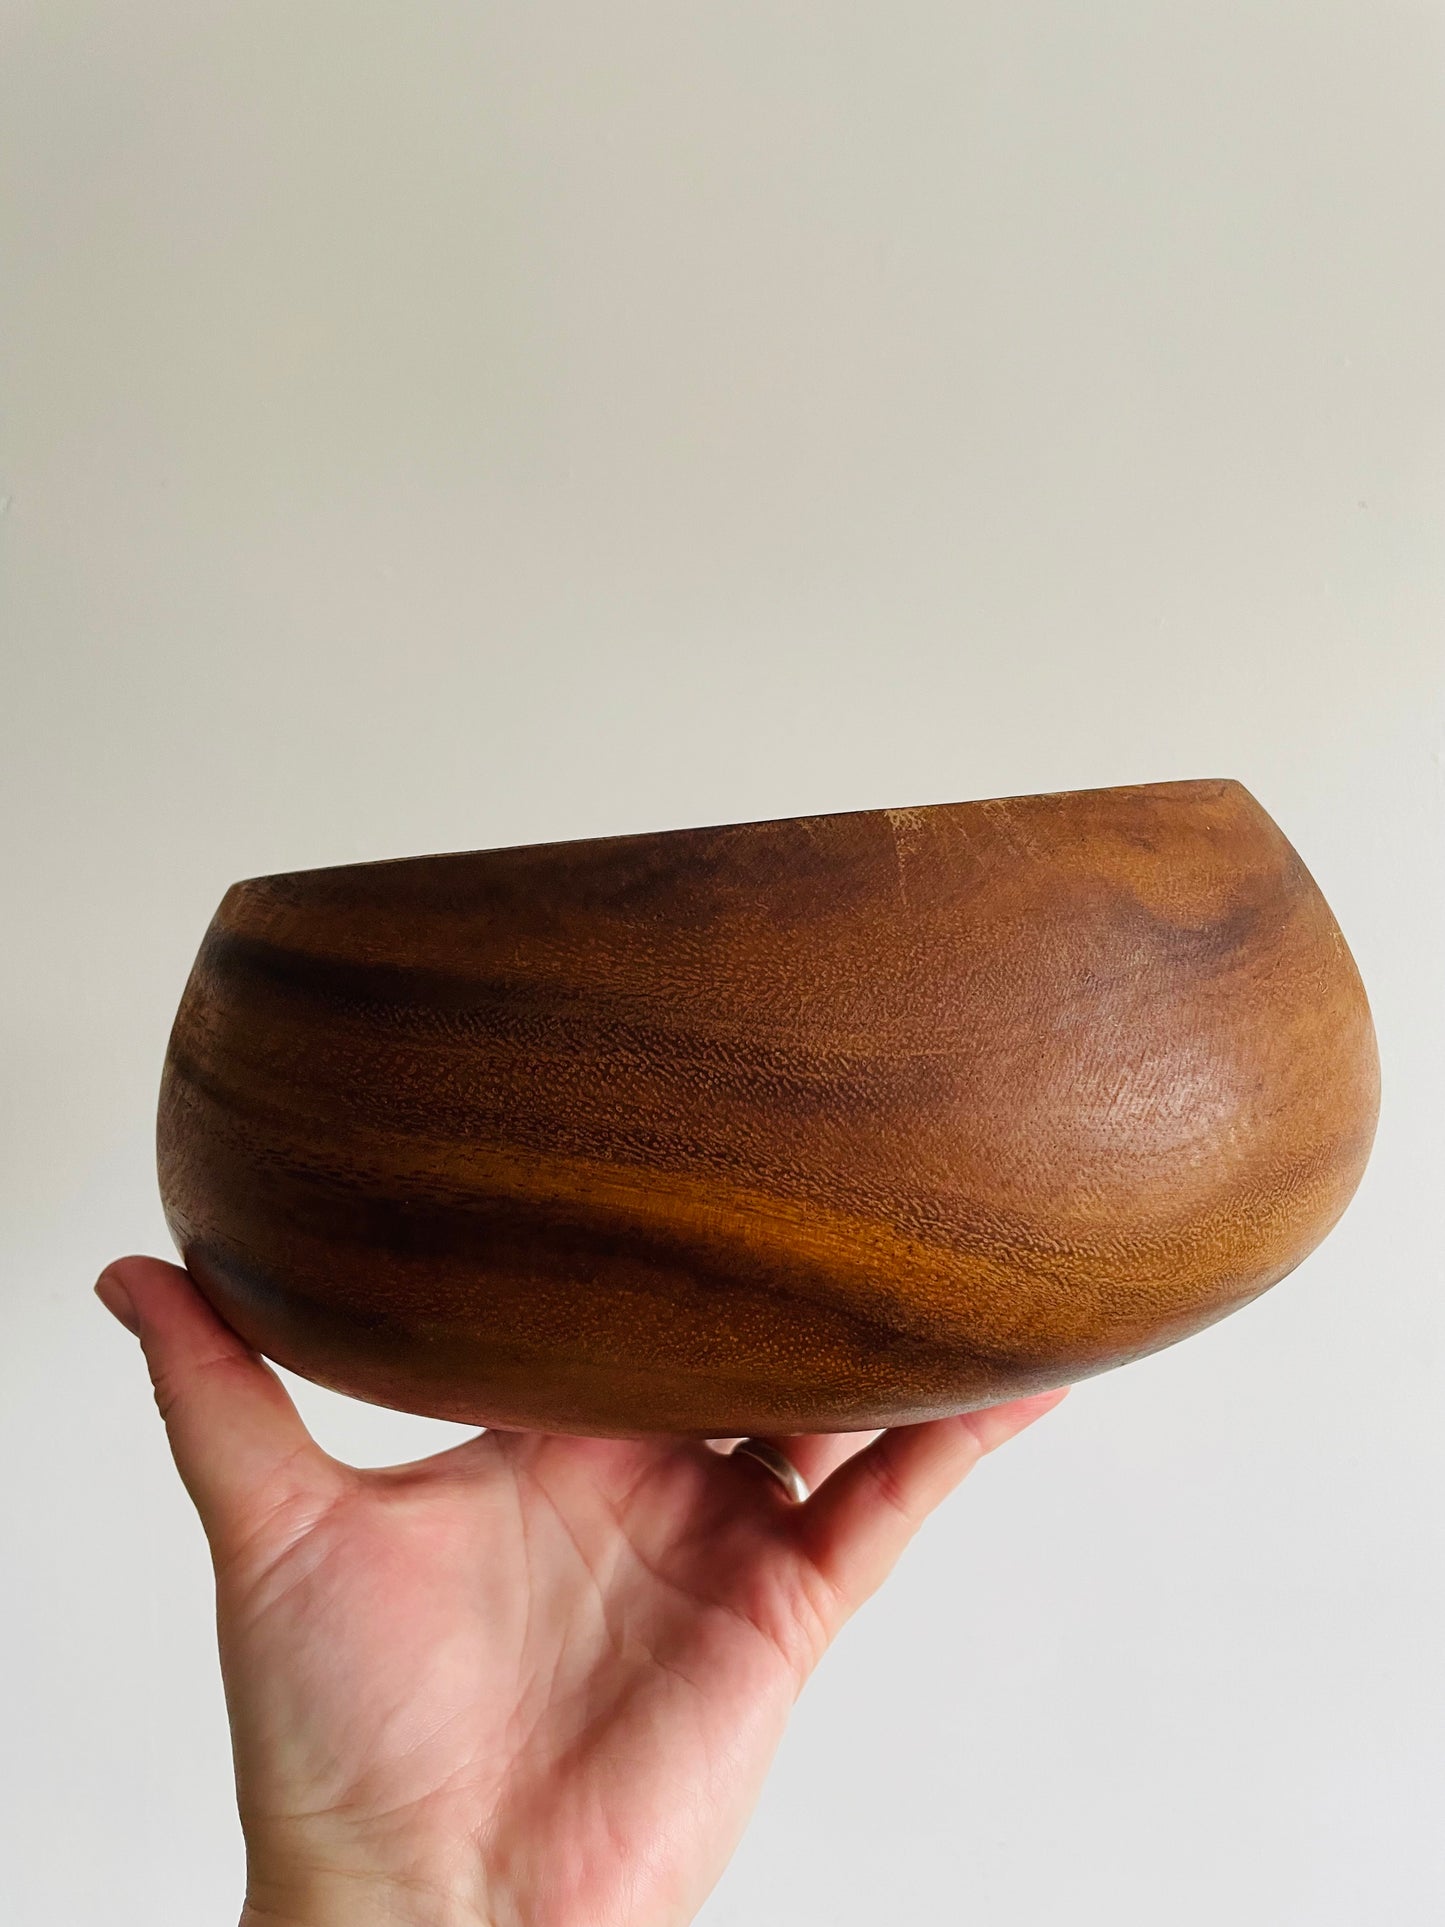 Large Round Solid Wood Bowl - Makes a Great Planter, Catchall, Fruit Bowl, or Bread Basket!